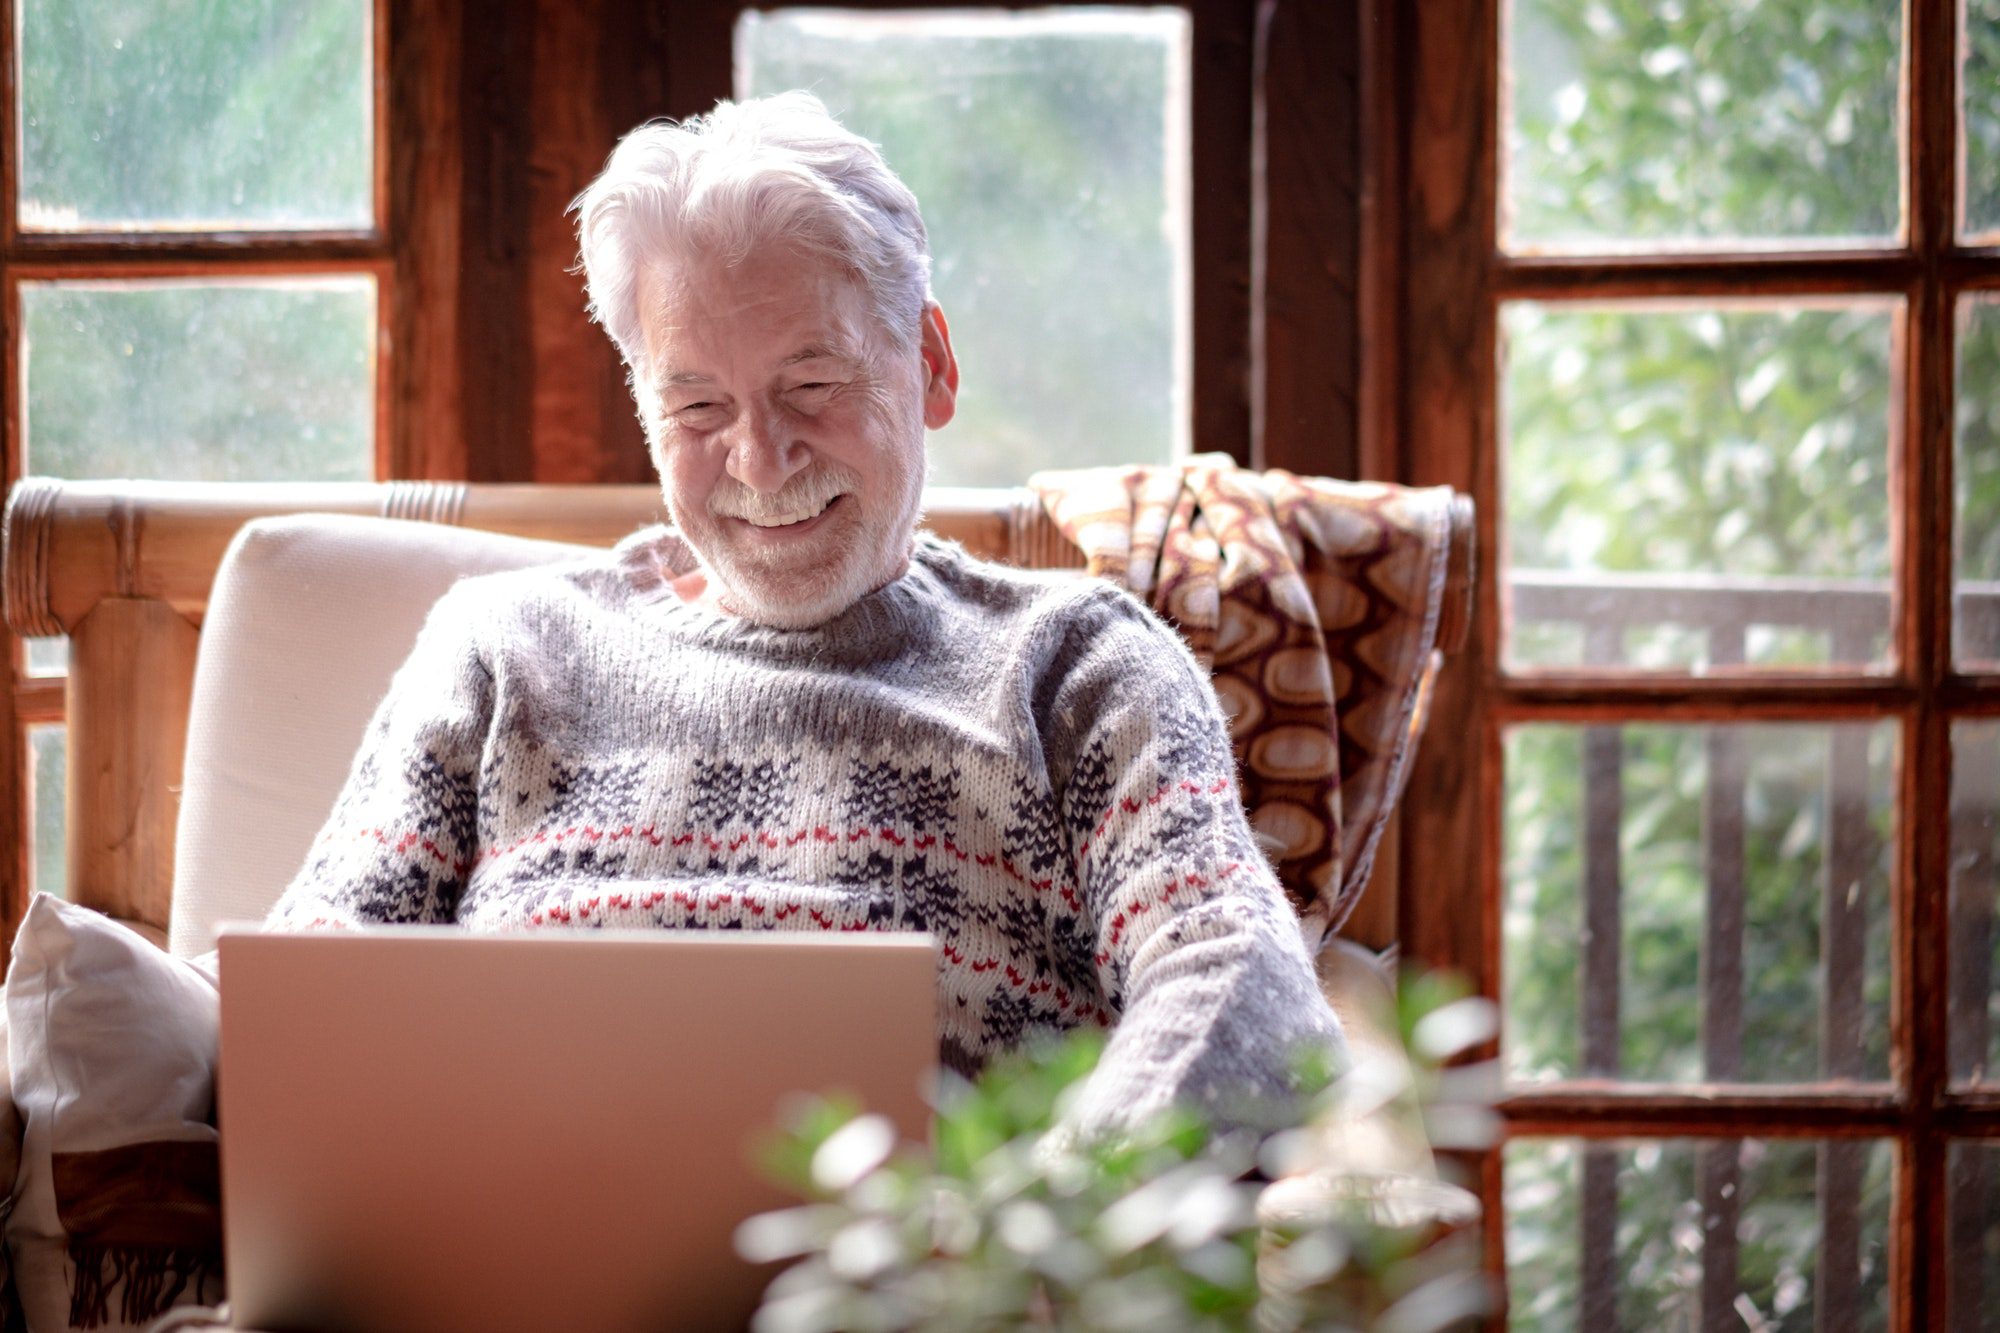 Smiling senior man in winter sweater sitting in living room using laptop computer. Medicare special enrollment period